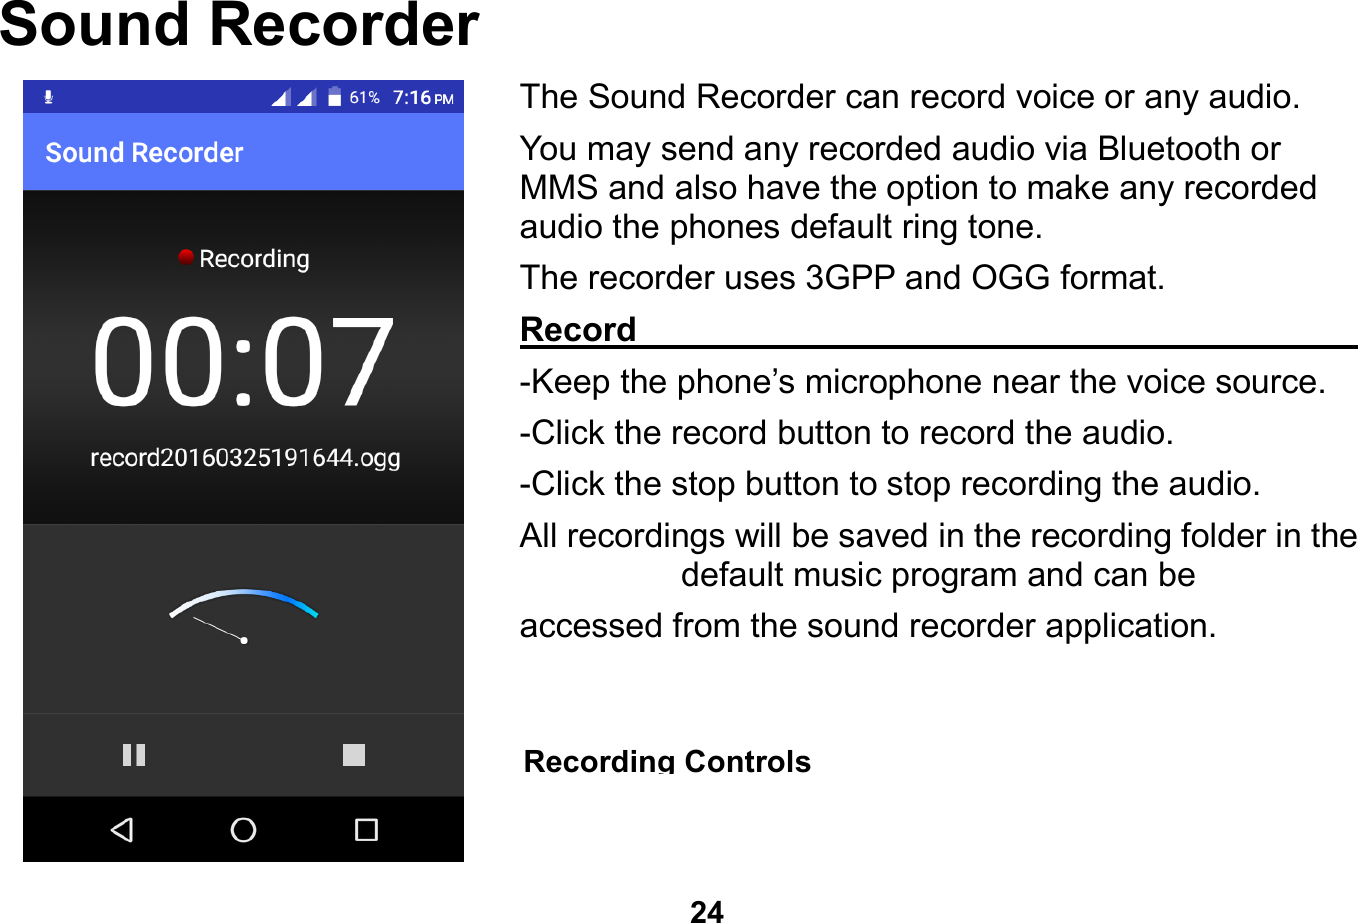   24  Sound Recorder The Sound Recorder can record voice or any audio.   You may send any recorded audio via Bluetooth or MMS and also have the option to make any recorded audio the phones default ring tone. The recorder uses 3GPP and OGG format. Record                                                        -Keep the phone’s microphone near the voice source. -Click the record button to record the audio. -Click the stop button to stop recording the audio. All recordings will be saved in the recording folder in the default music program and can be   accessed from the sound recorder application.    Recording Controls 